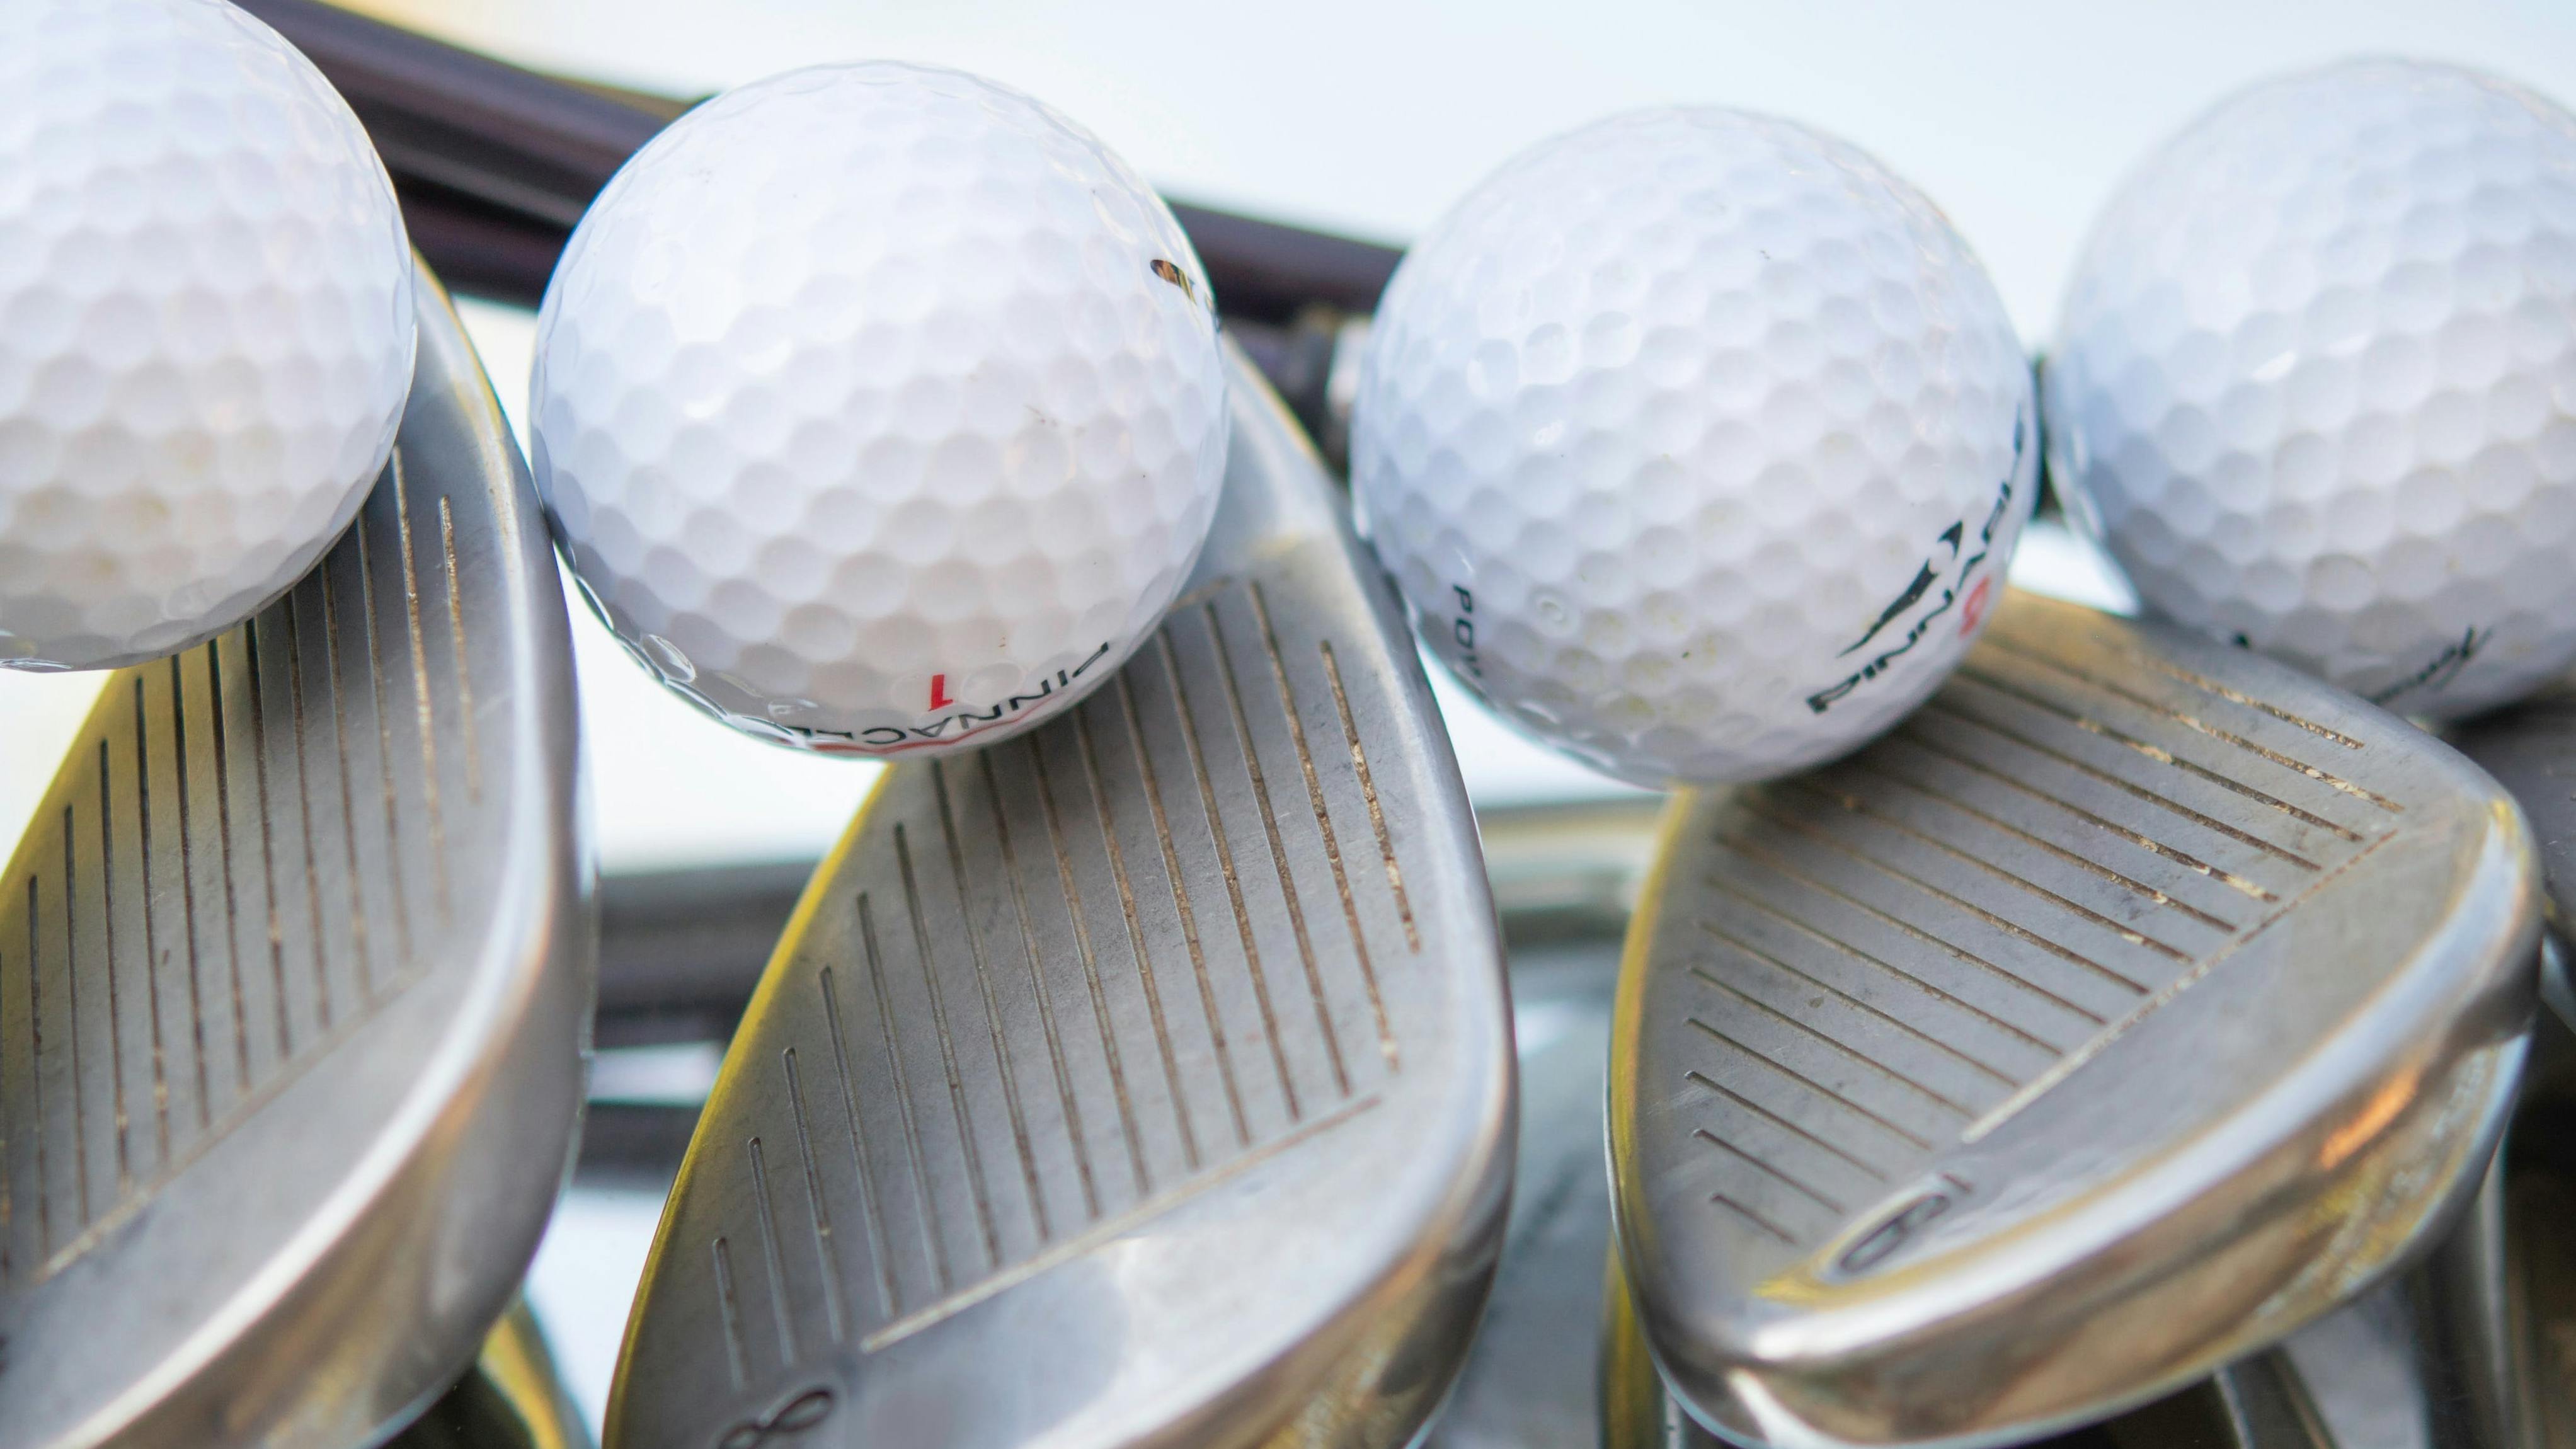 Golf clubs and balls with reflection 